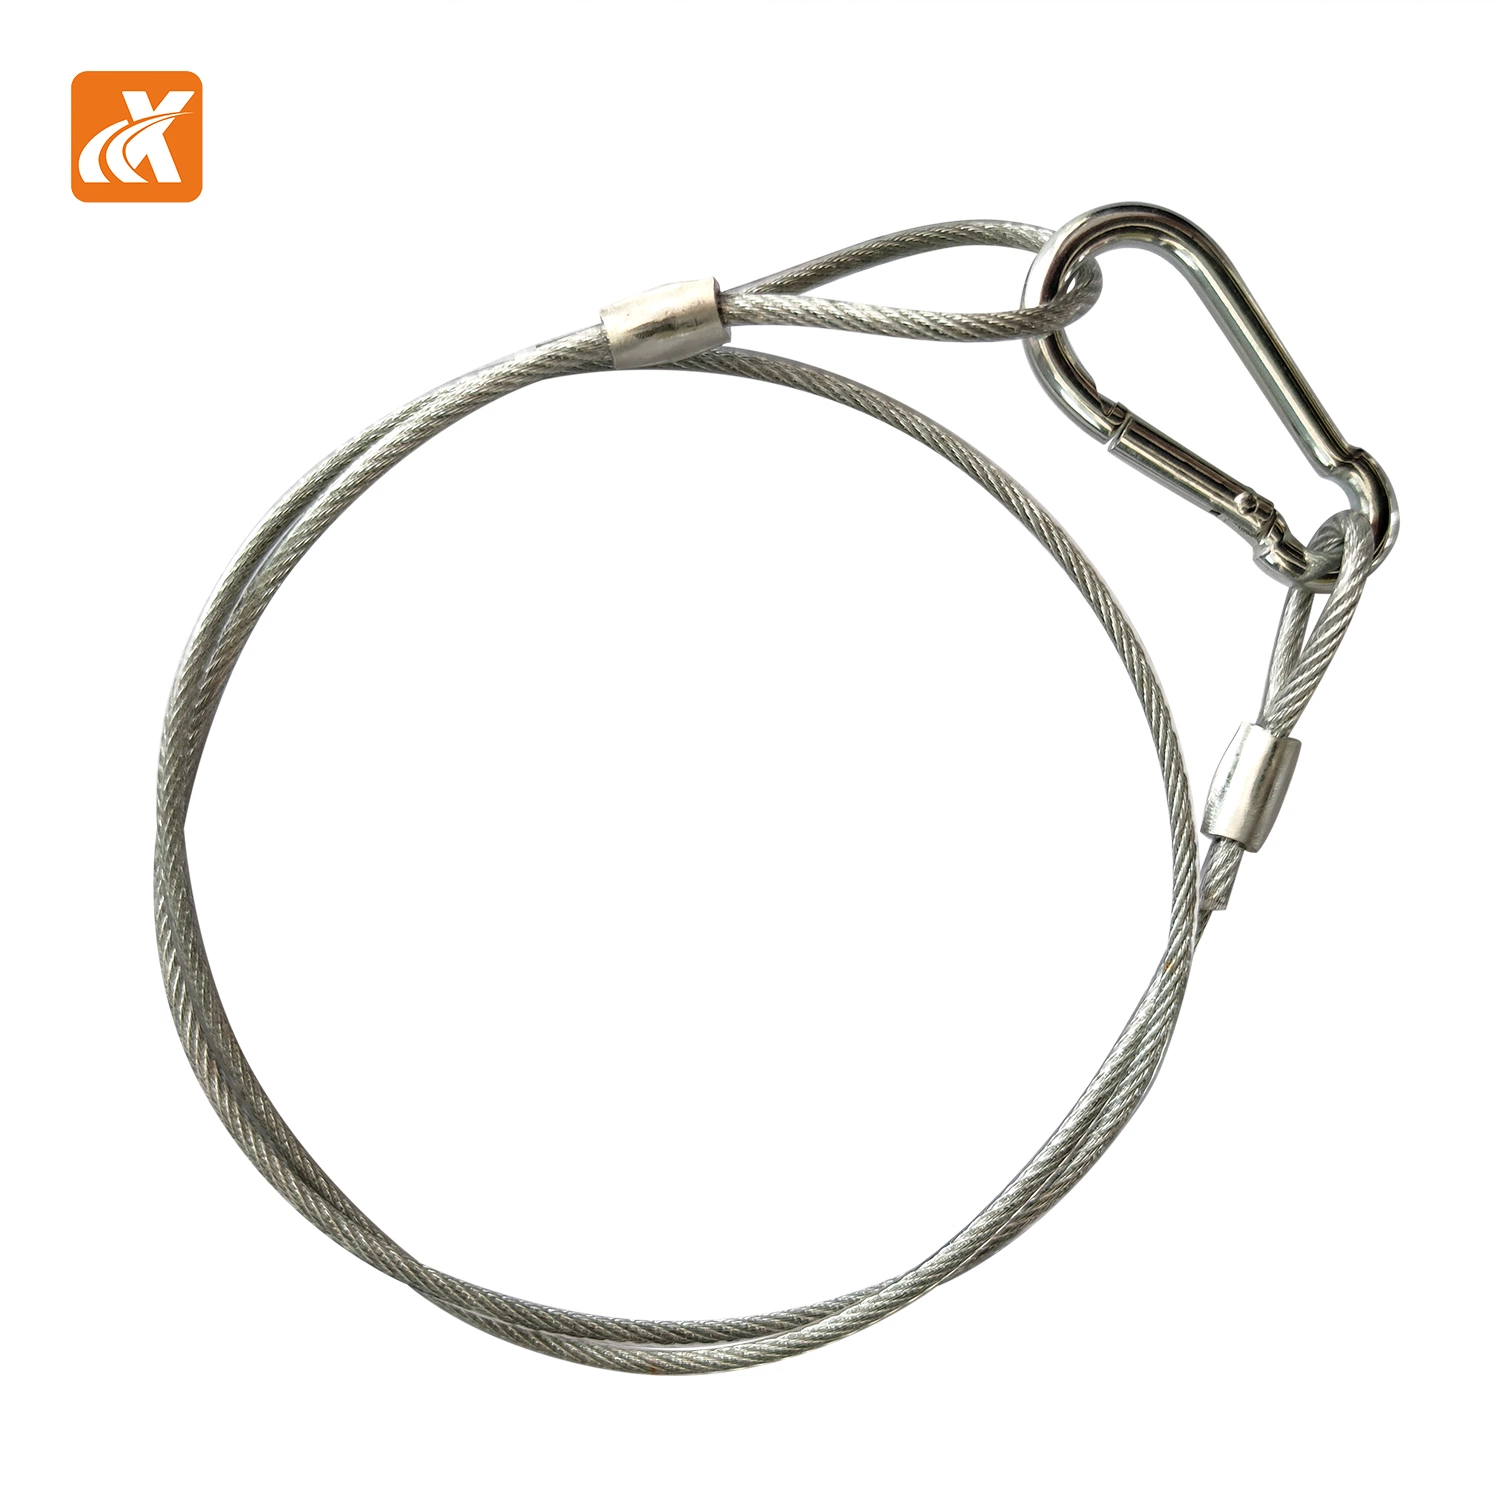 Stainless Steel Adhesive Material Safety Rope Black Standard Spring Fastener Love Eye Soft Light